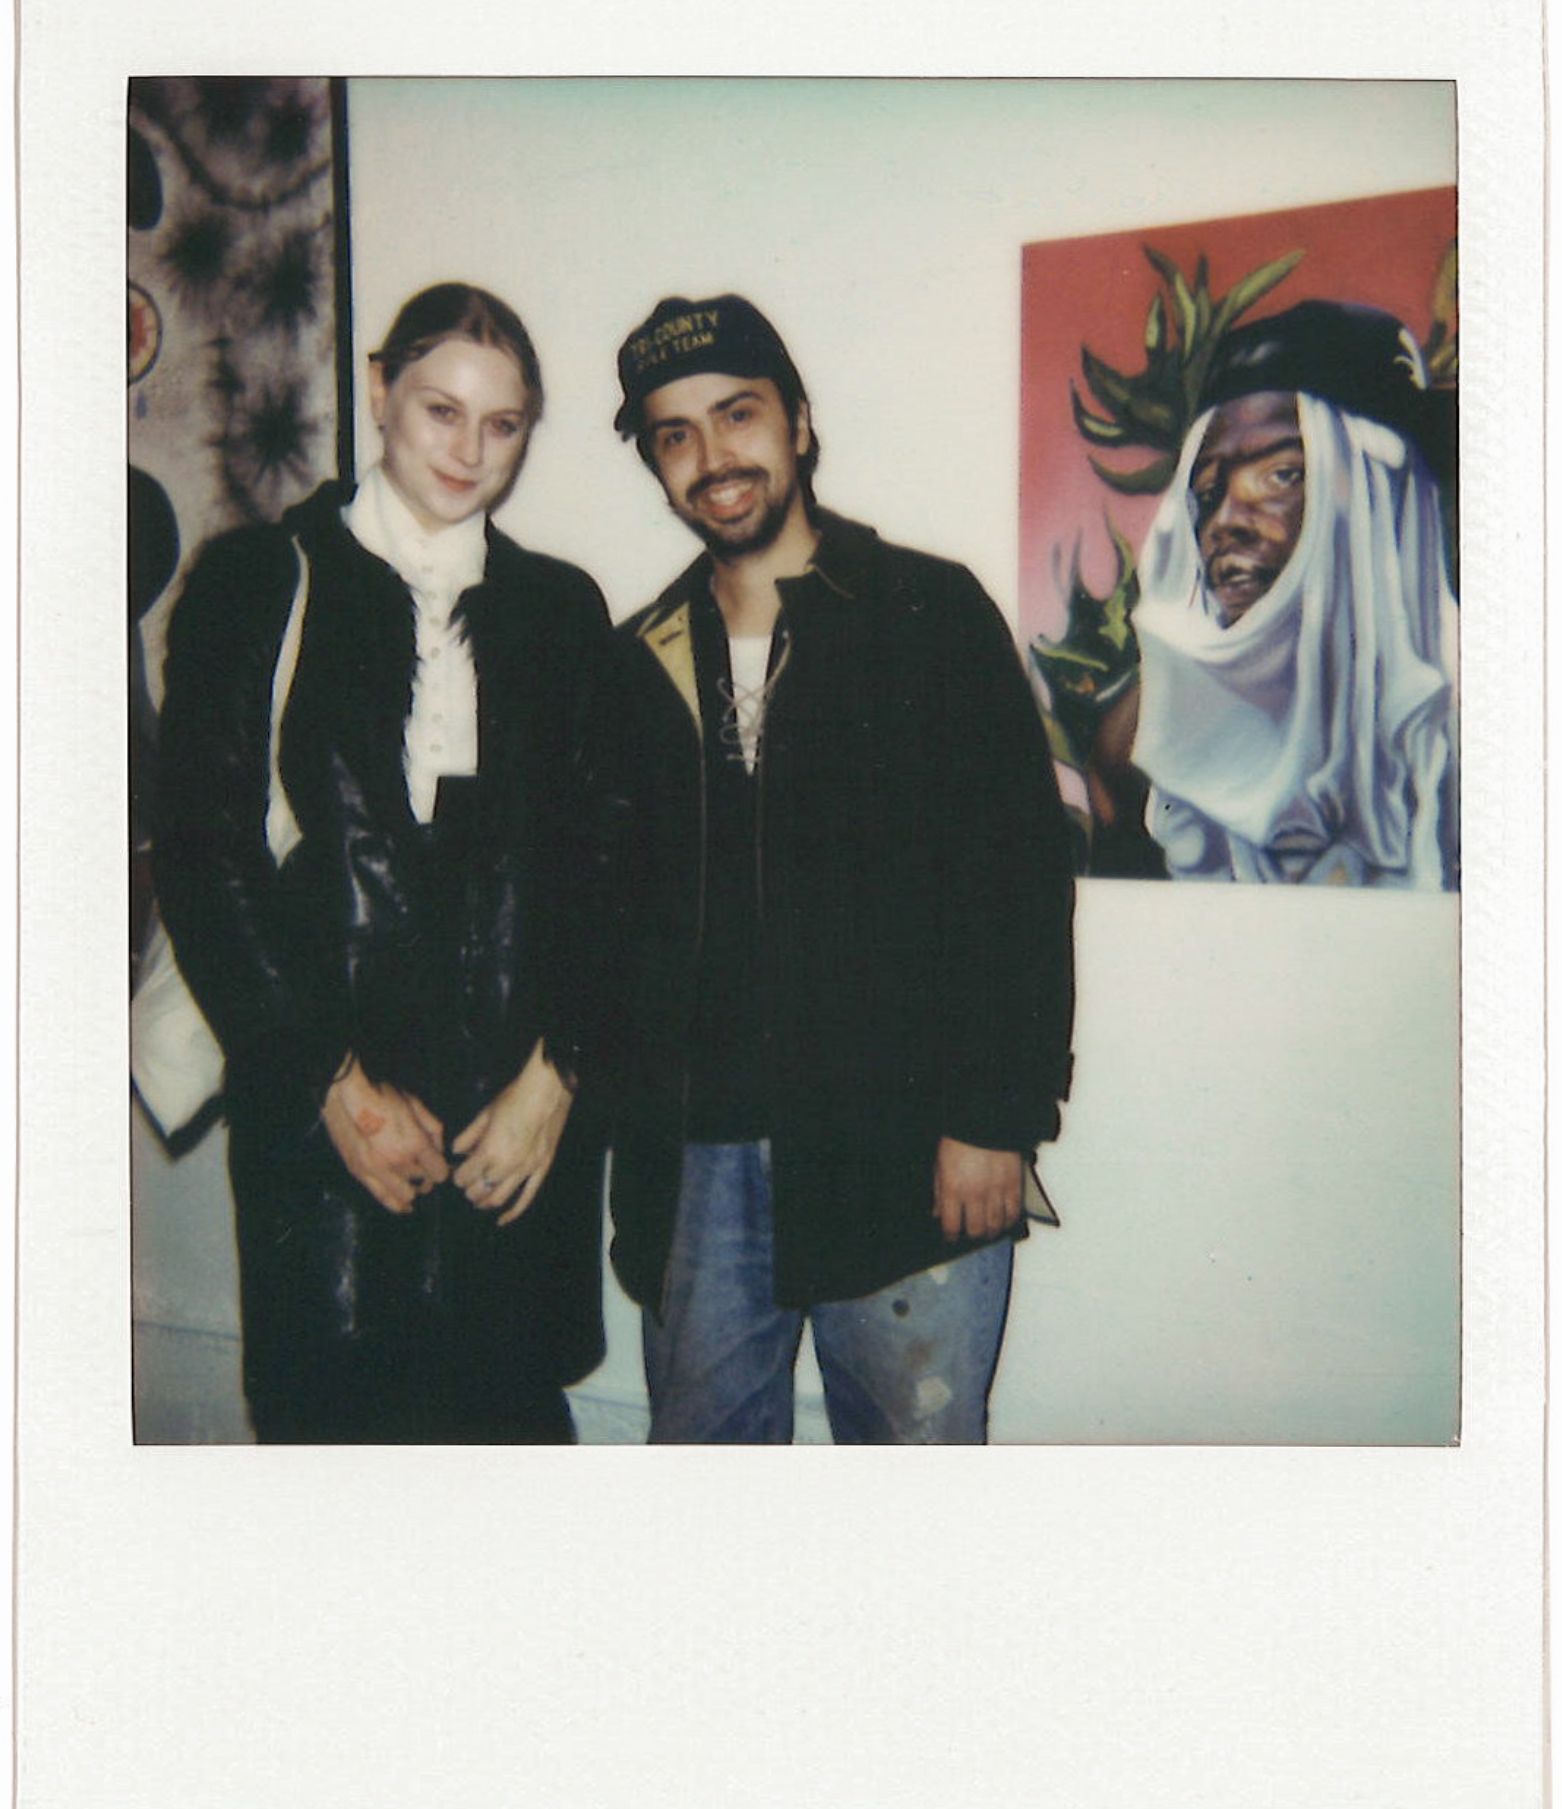 polaroid of two people posing in front of art gallery wall